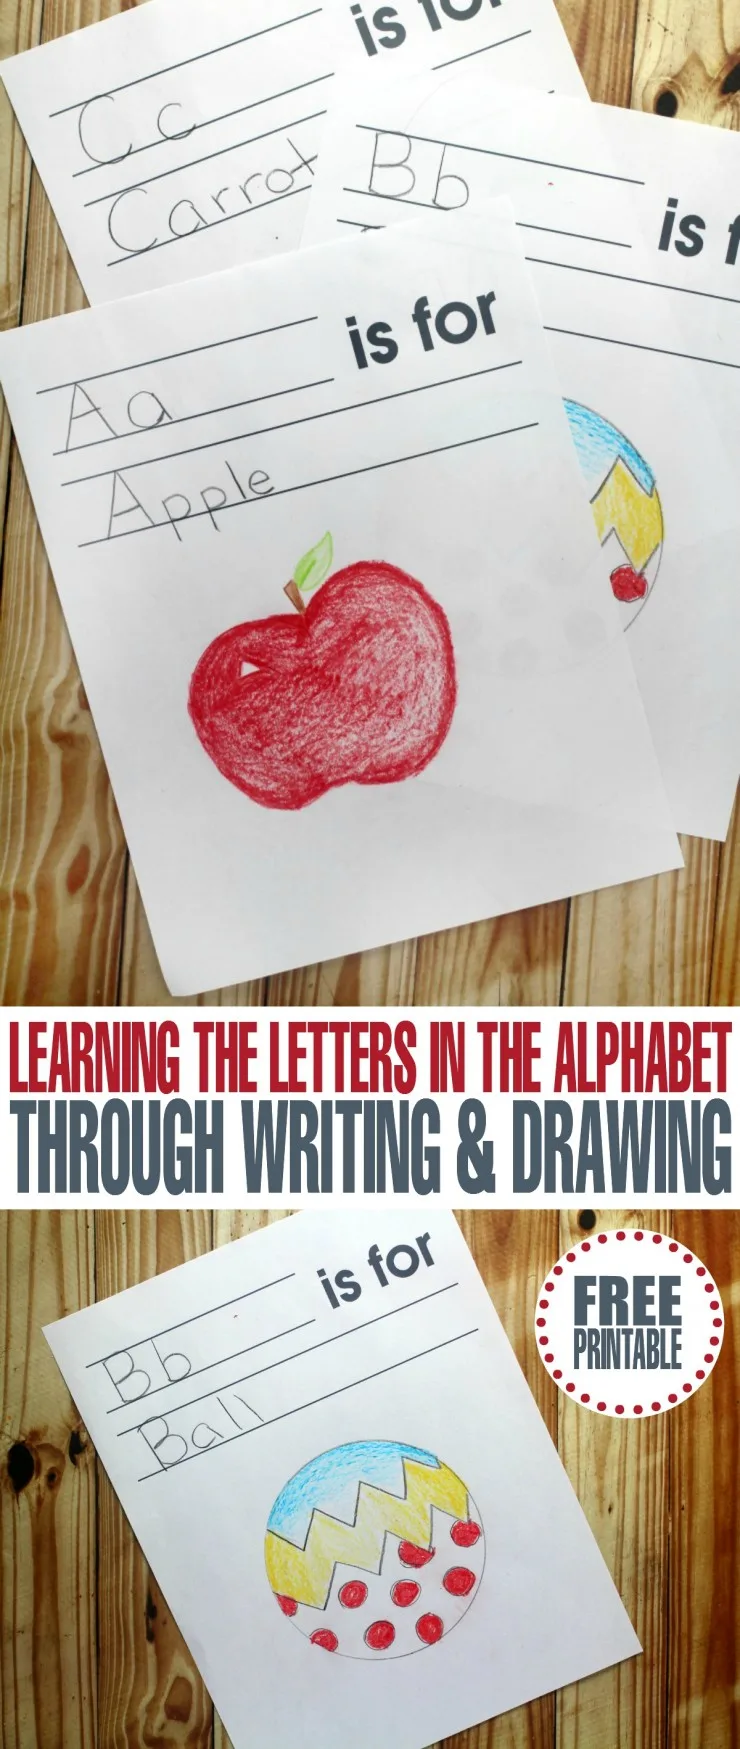 Learning the Letters in the Alphabet Through Writing & Drawing - tips, tricks plus a fun free printable to help kids learn to write the alphabet!